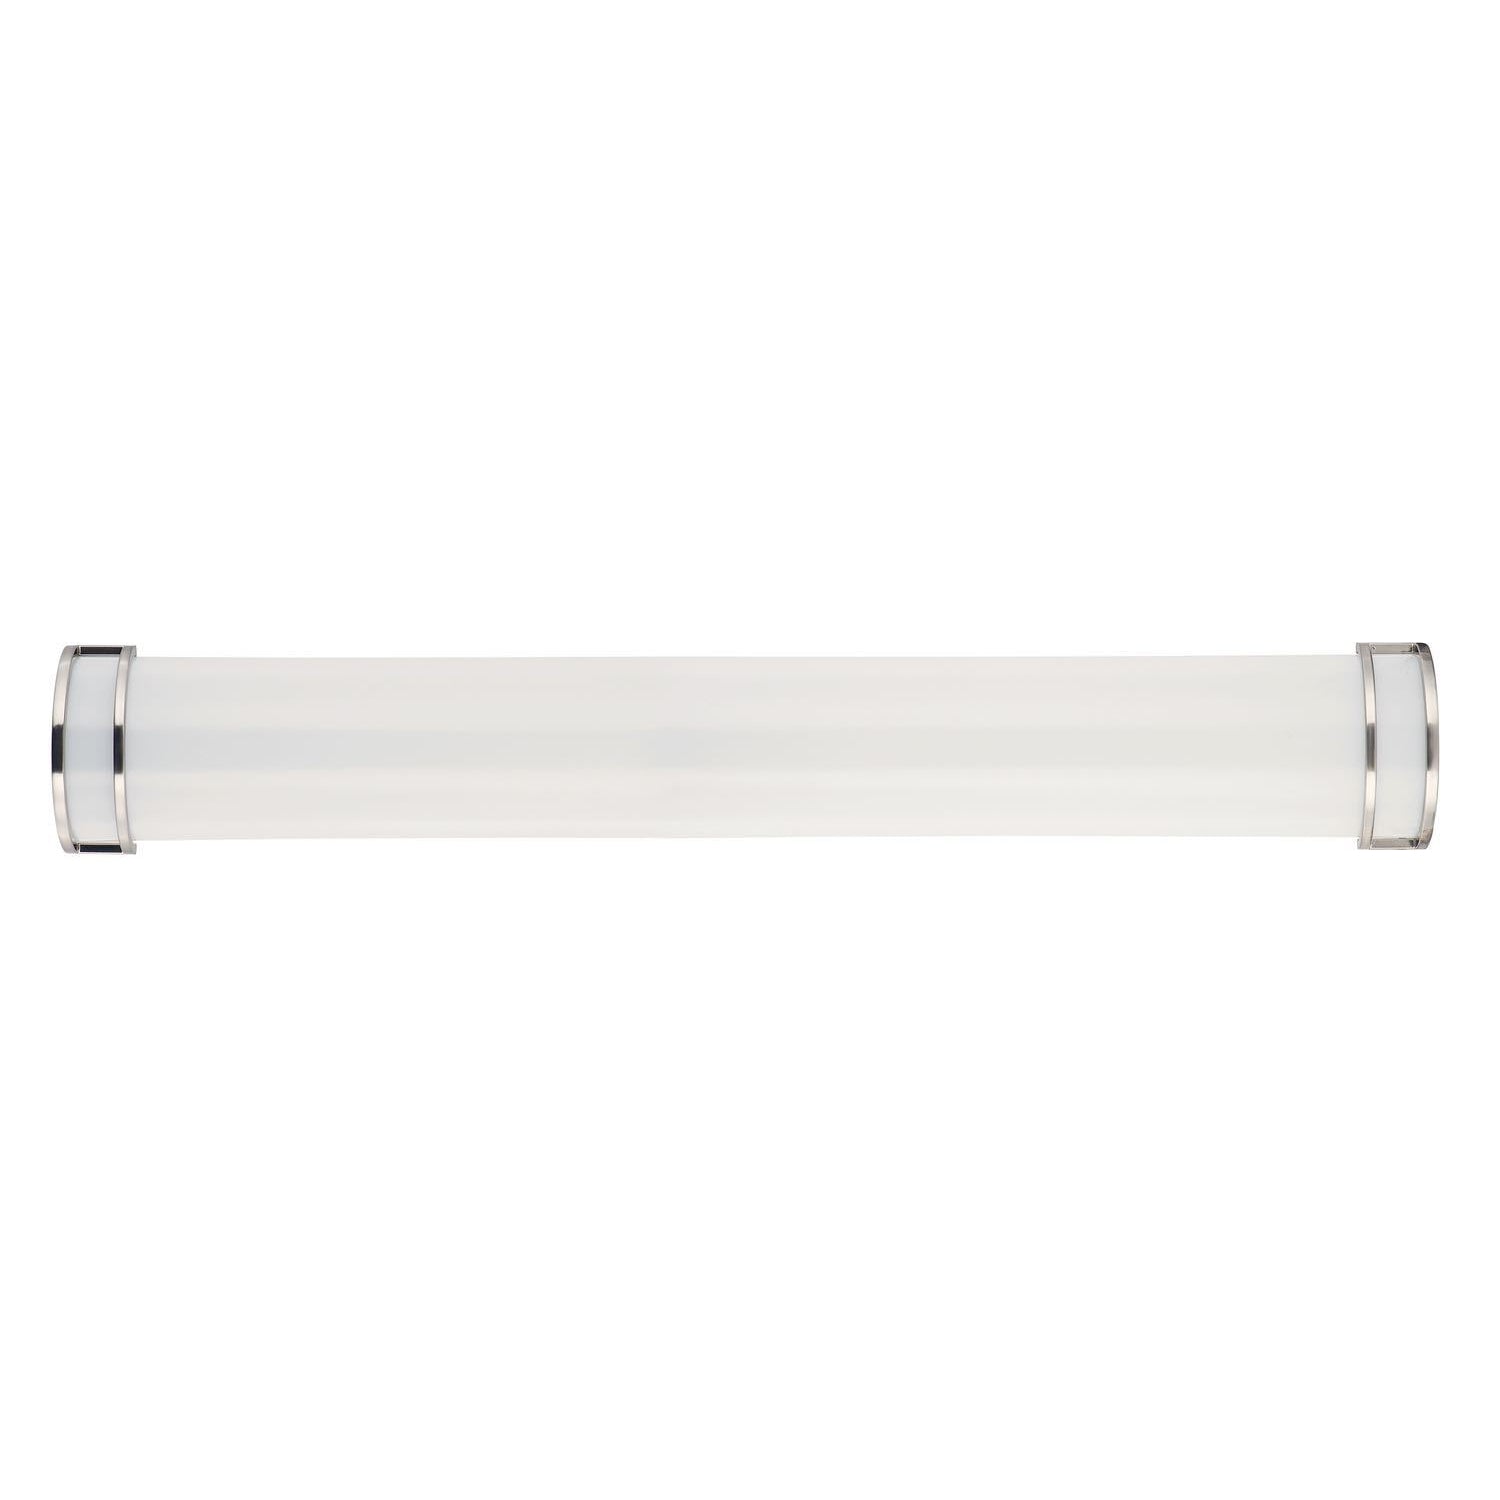 Linear LED Sconce Satin Nickel